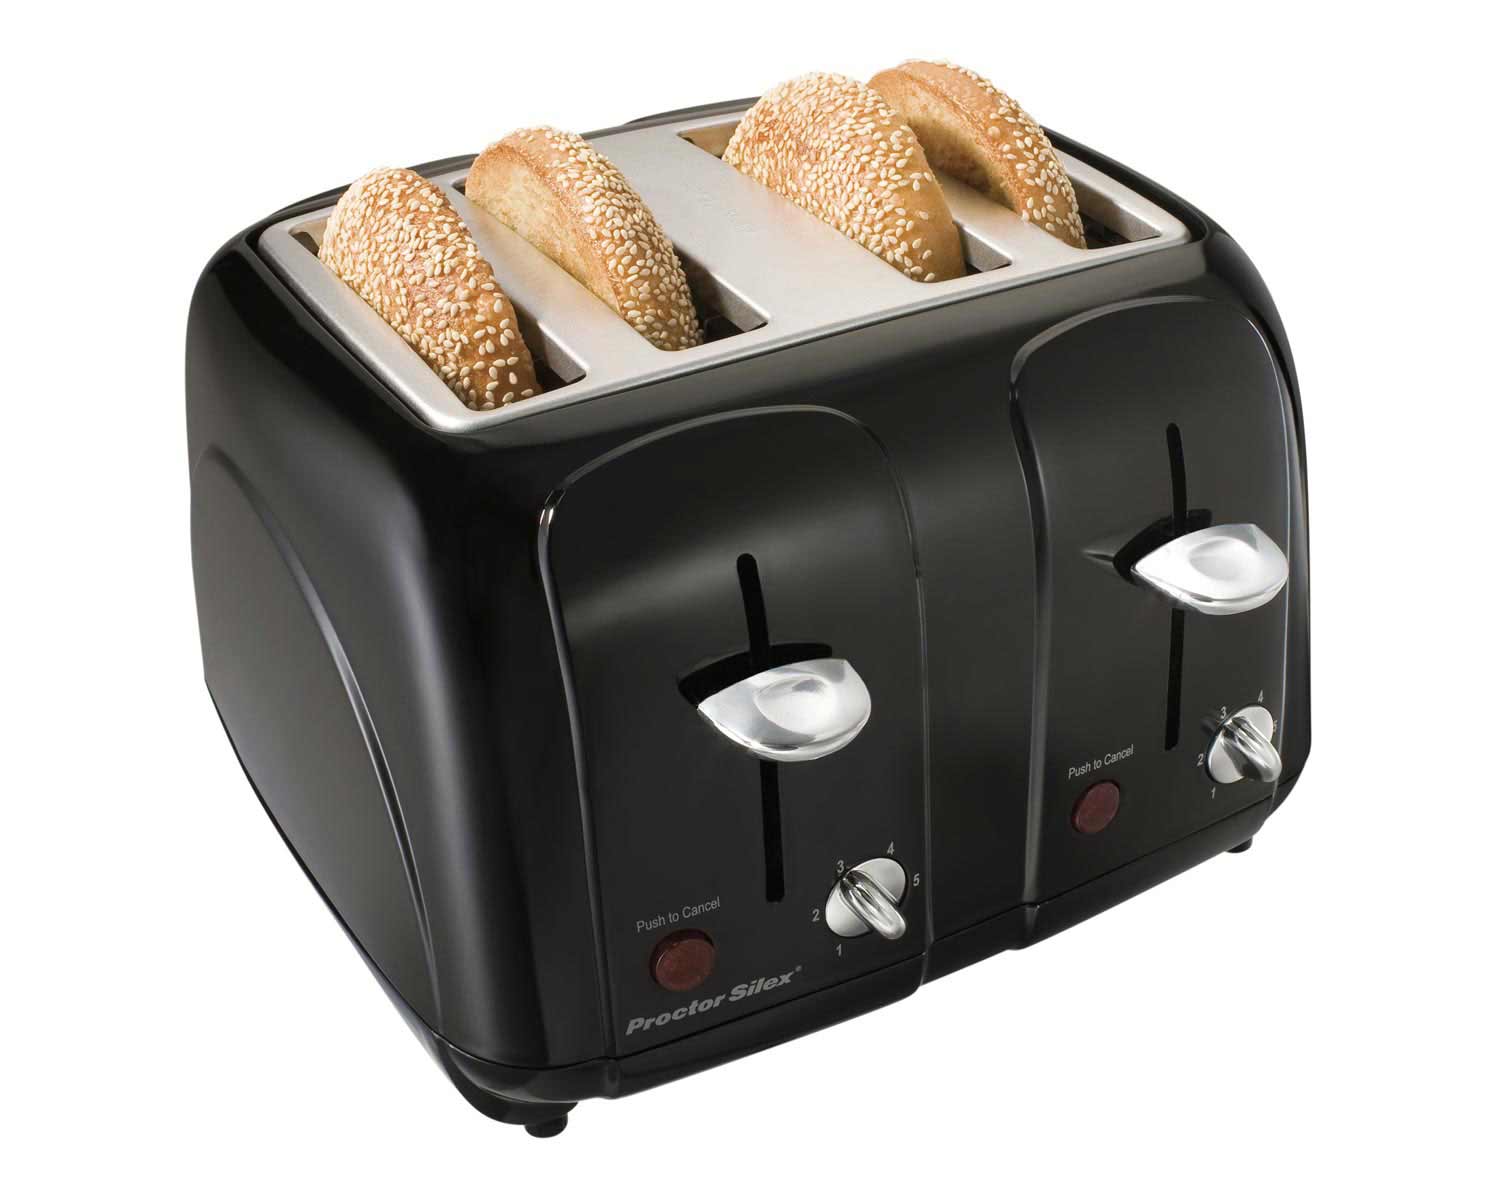 Cool-Touch 4 Slice Toaster (black)